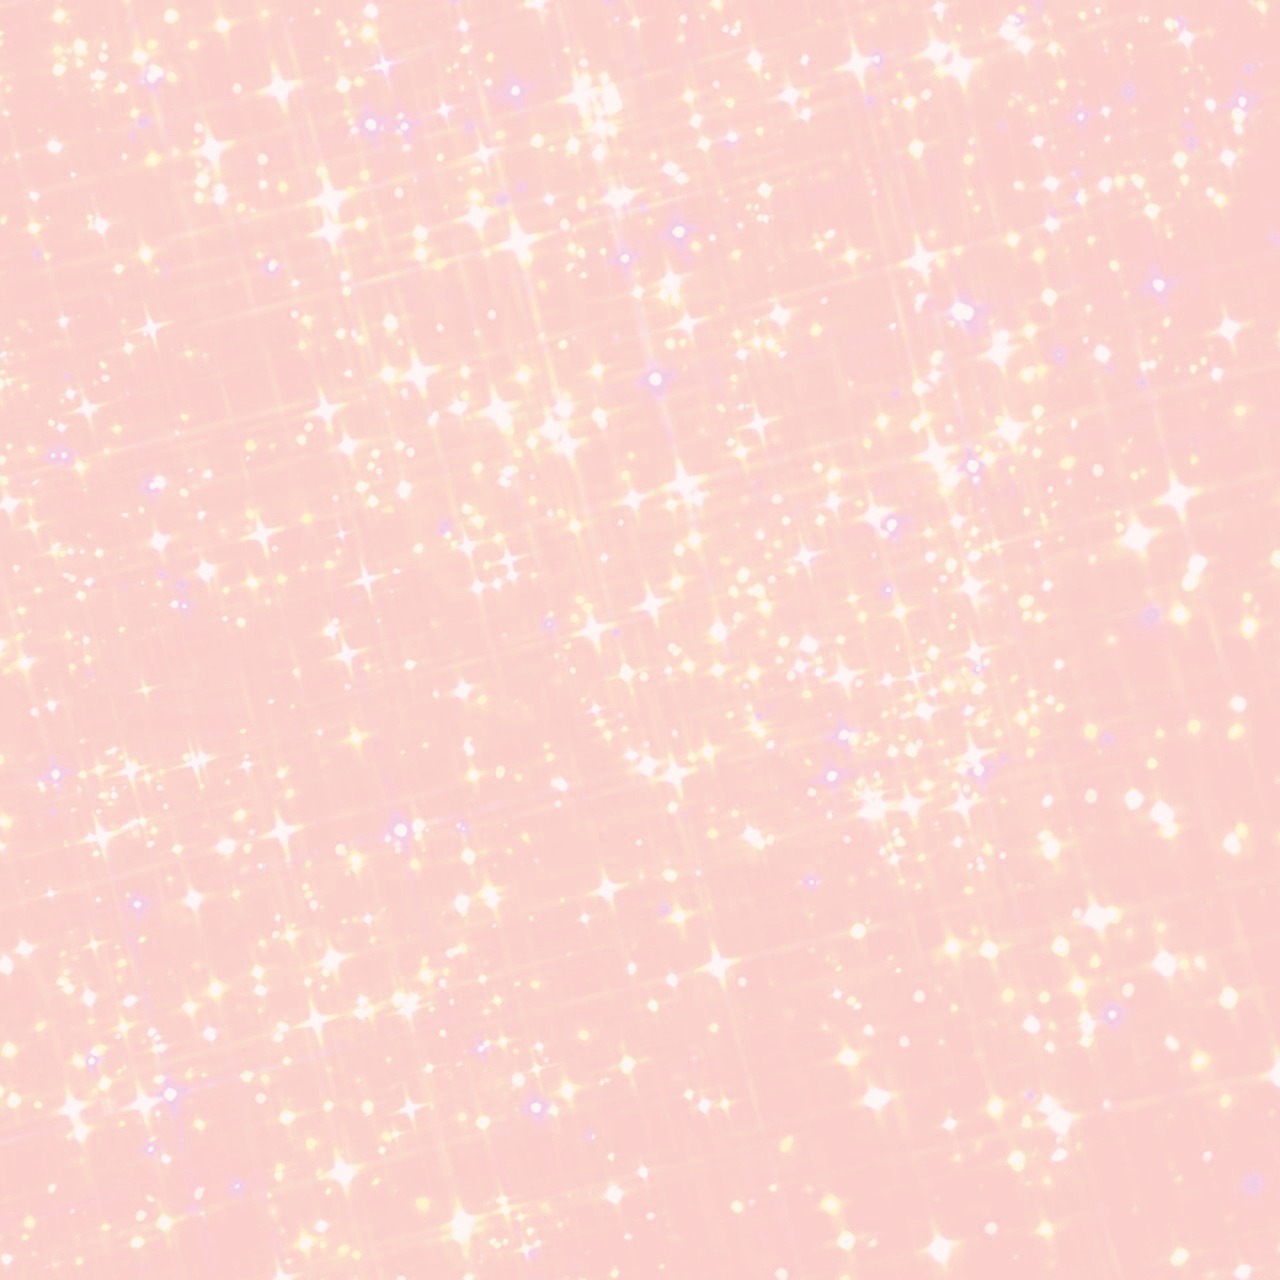 shimmer background pink free photo